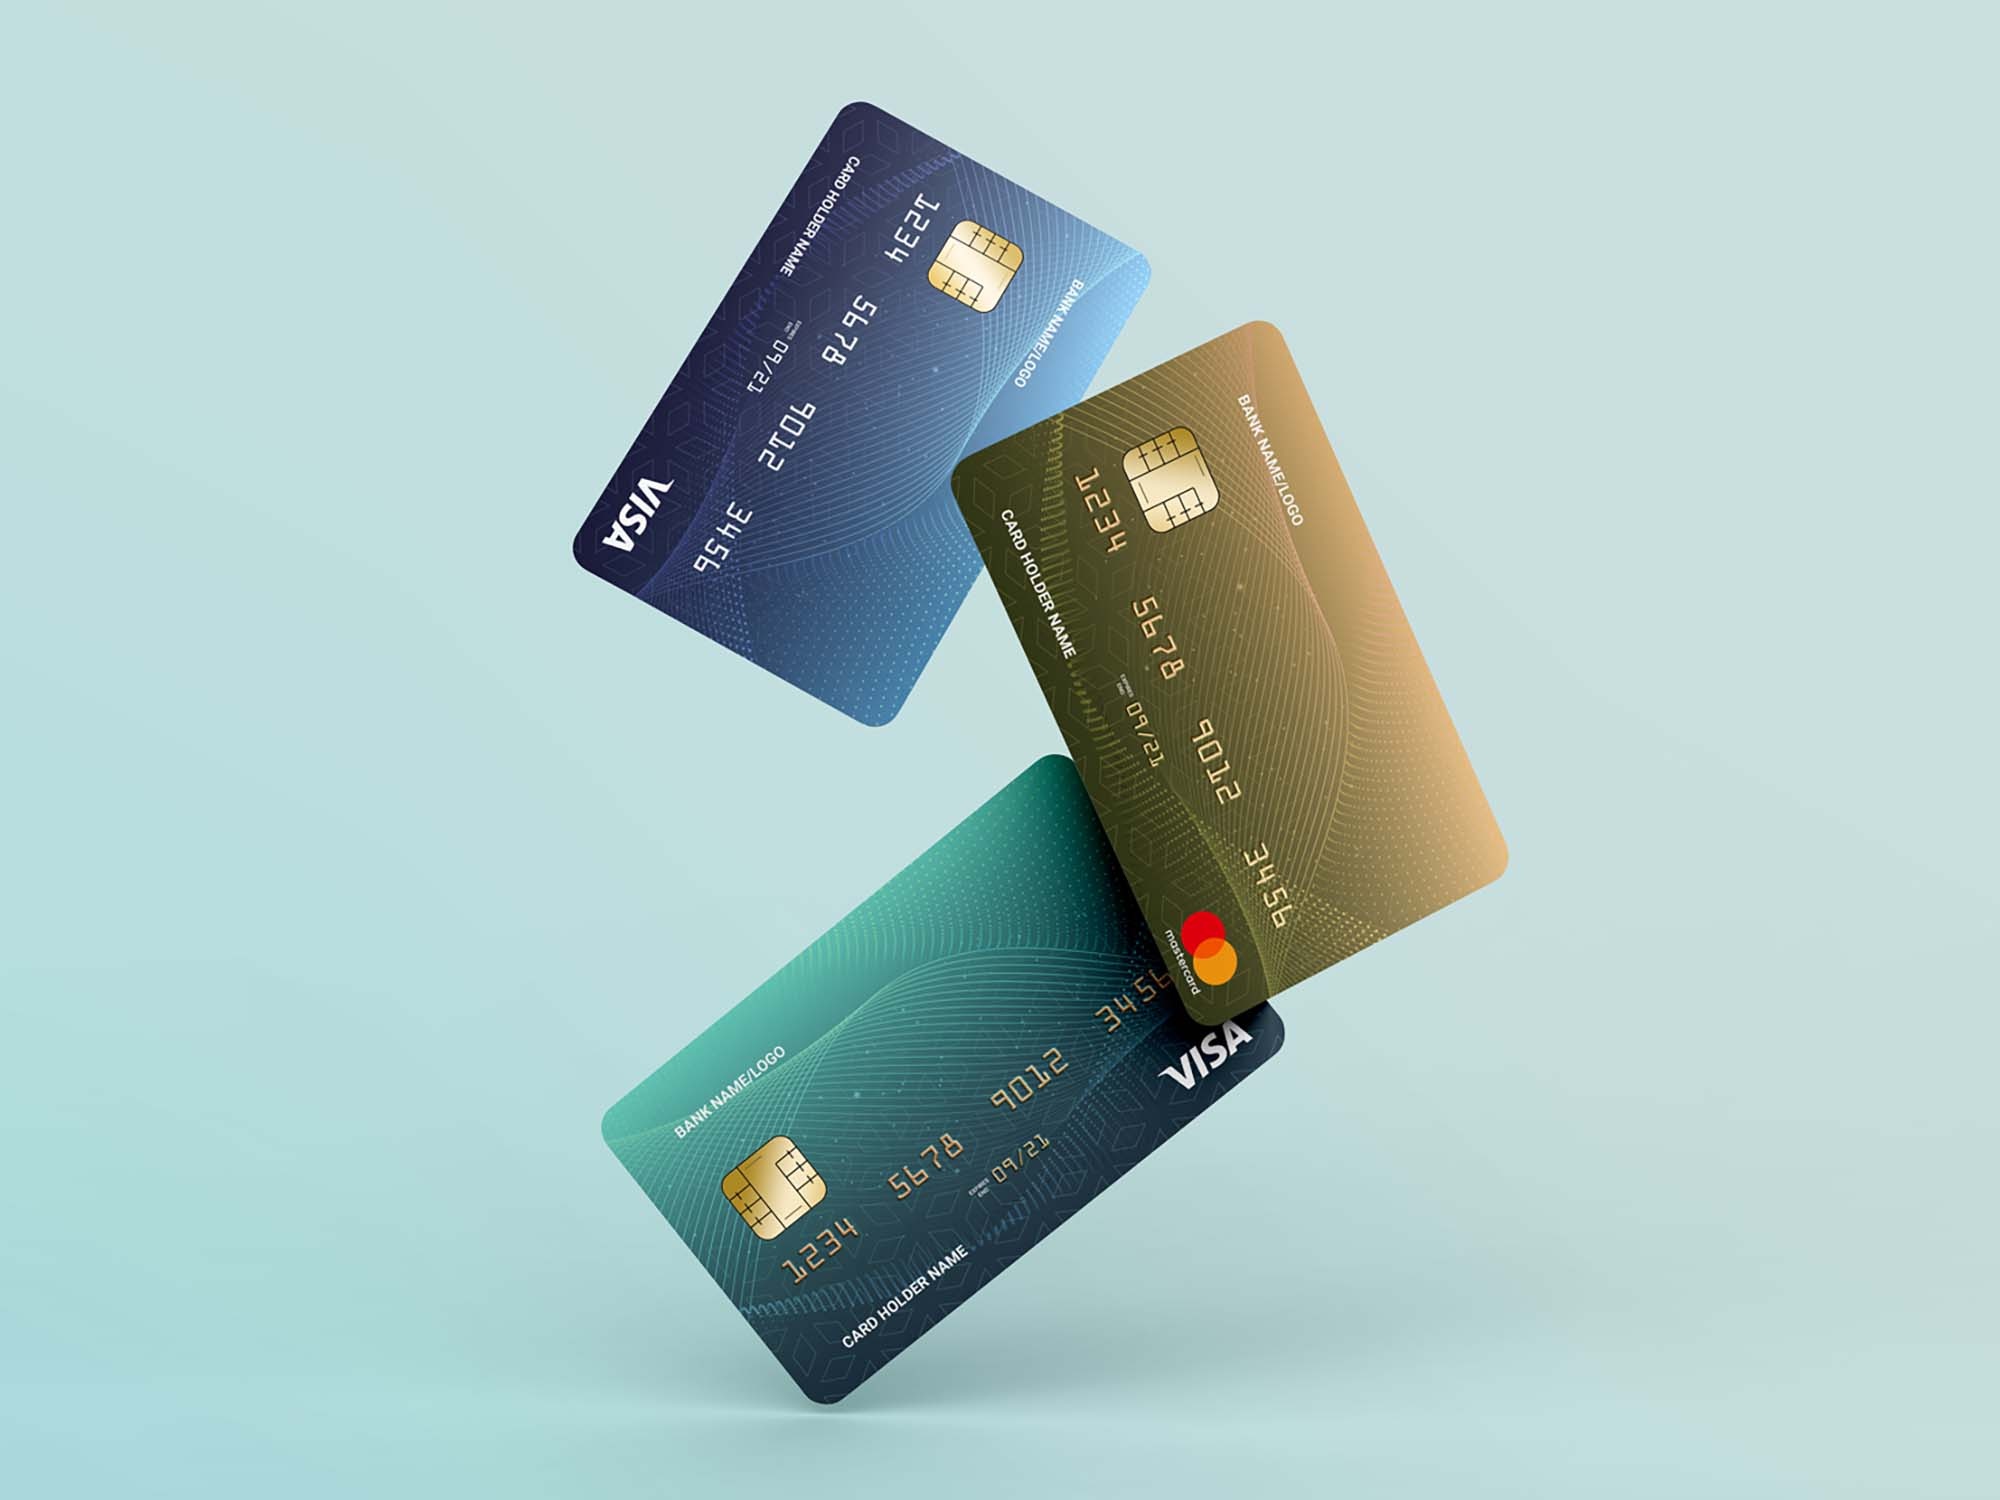 Visa (Card): Introduced payWave, a contactless payment technology feature, In September 2007. 2000x1500 HD Background.